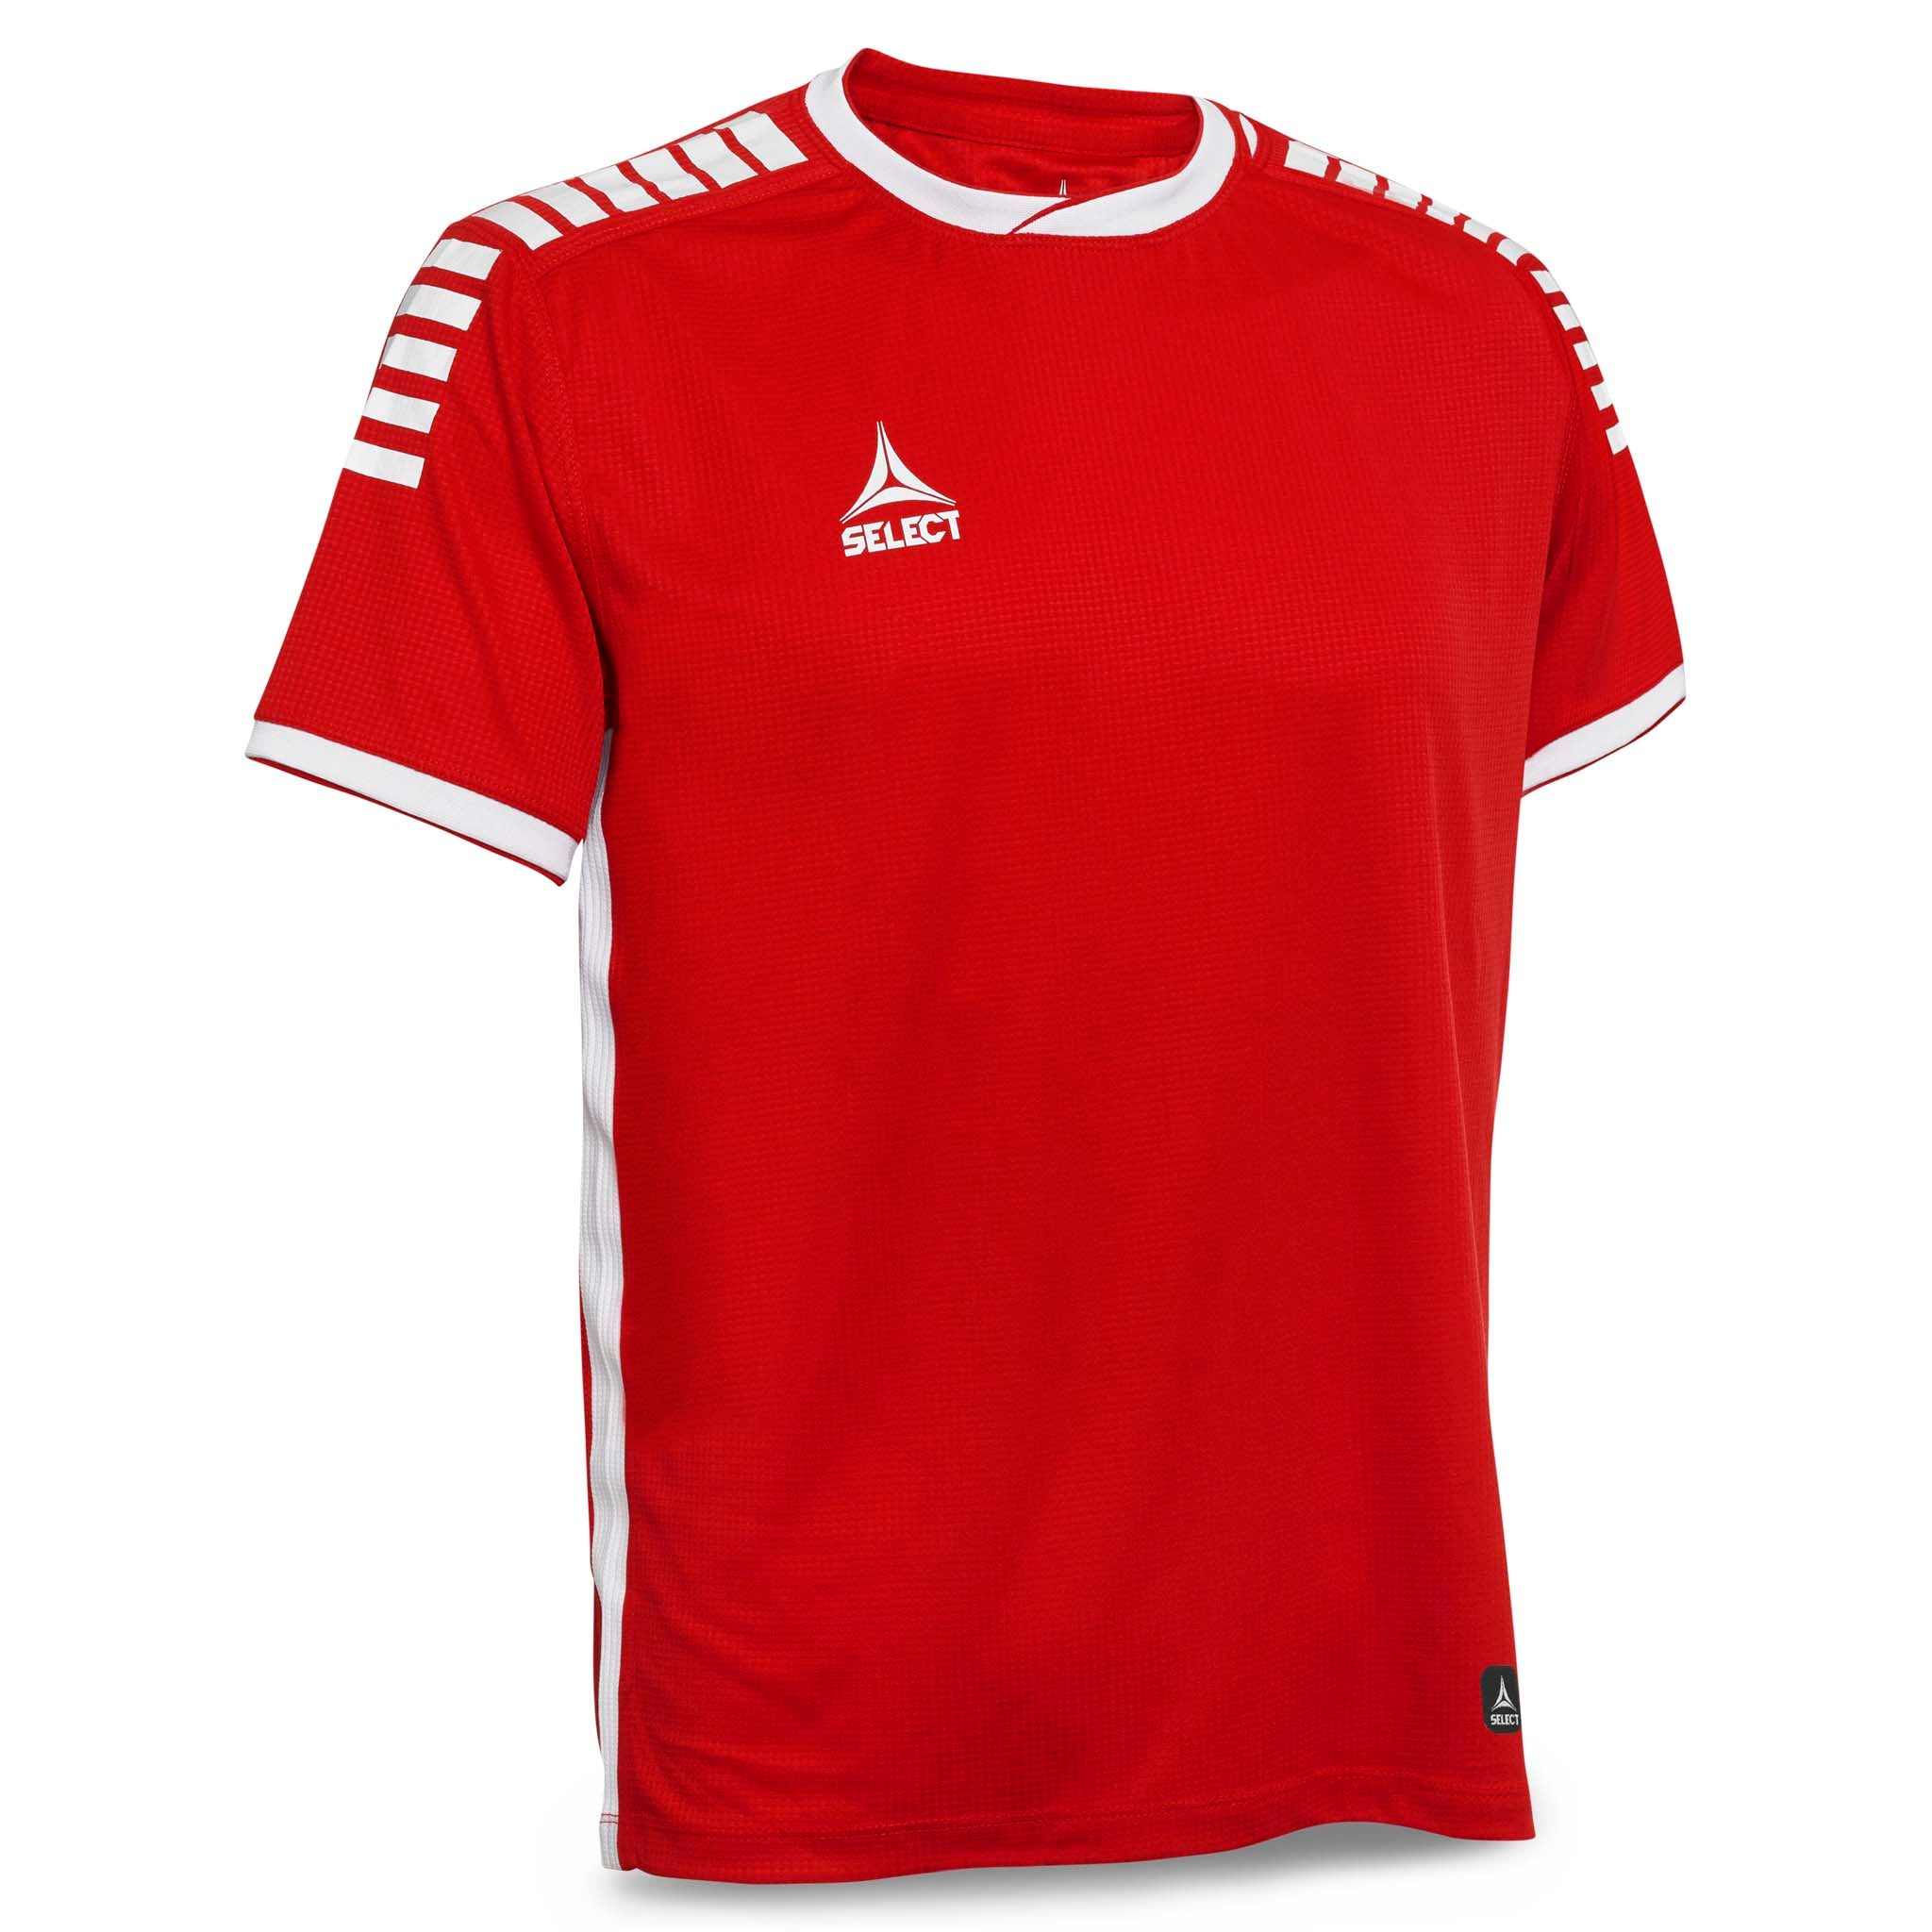 Short Sleeve player shirt - Monaco, youth #colour_red